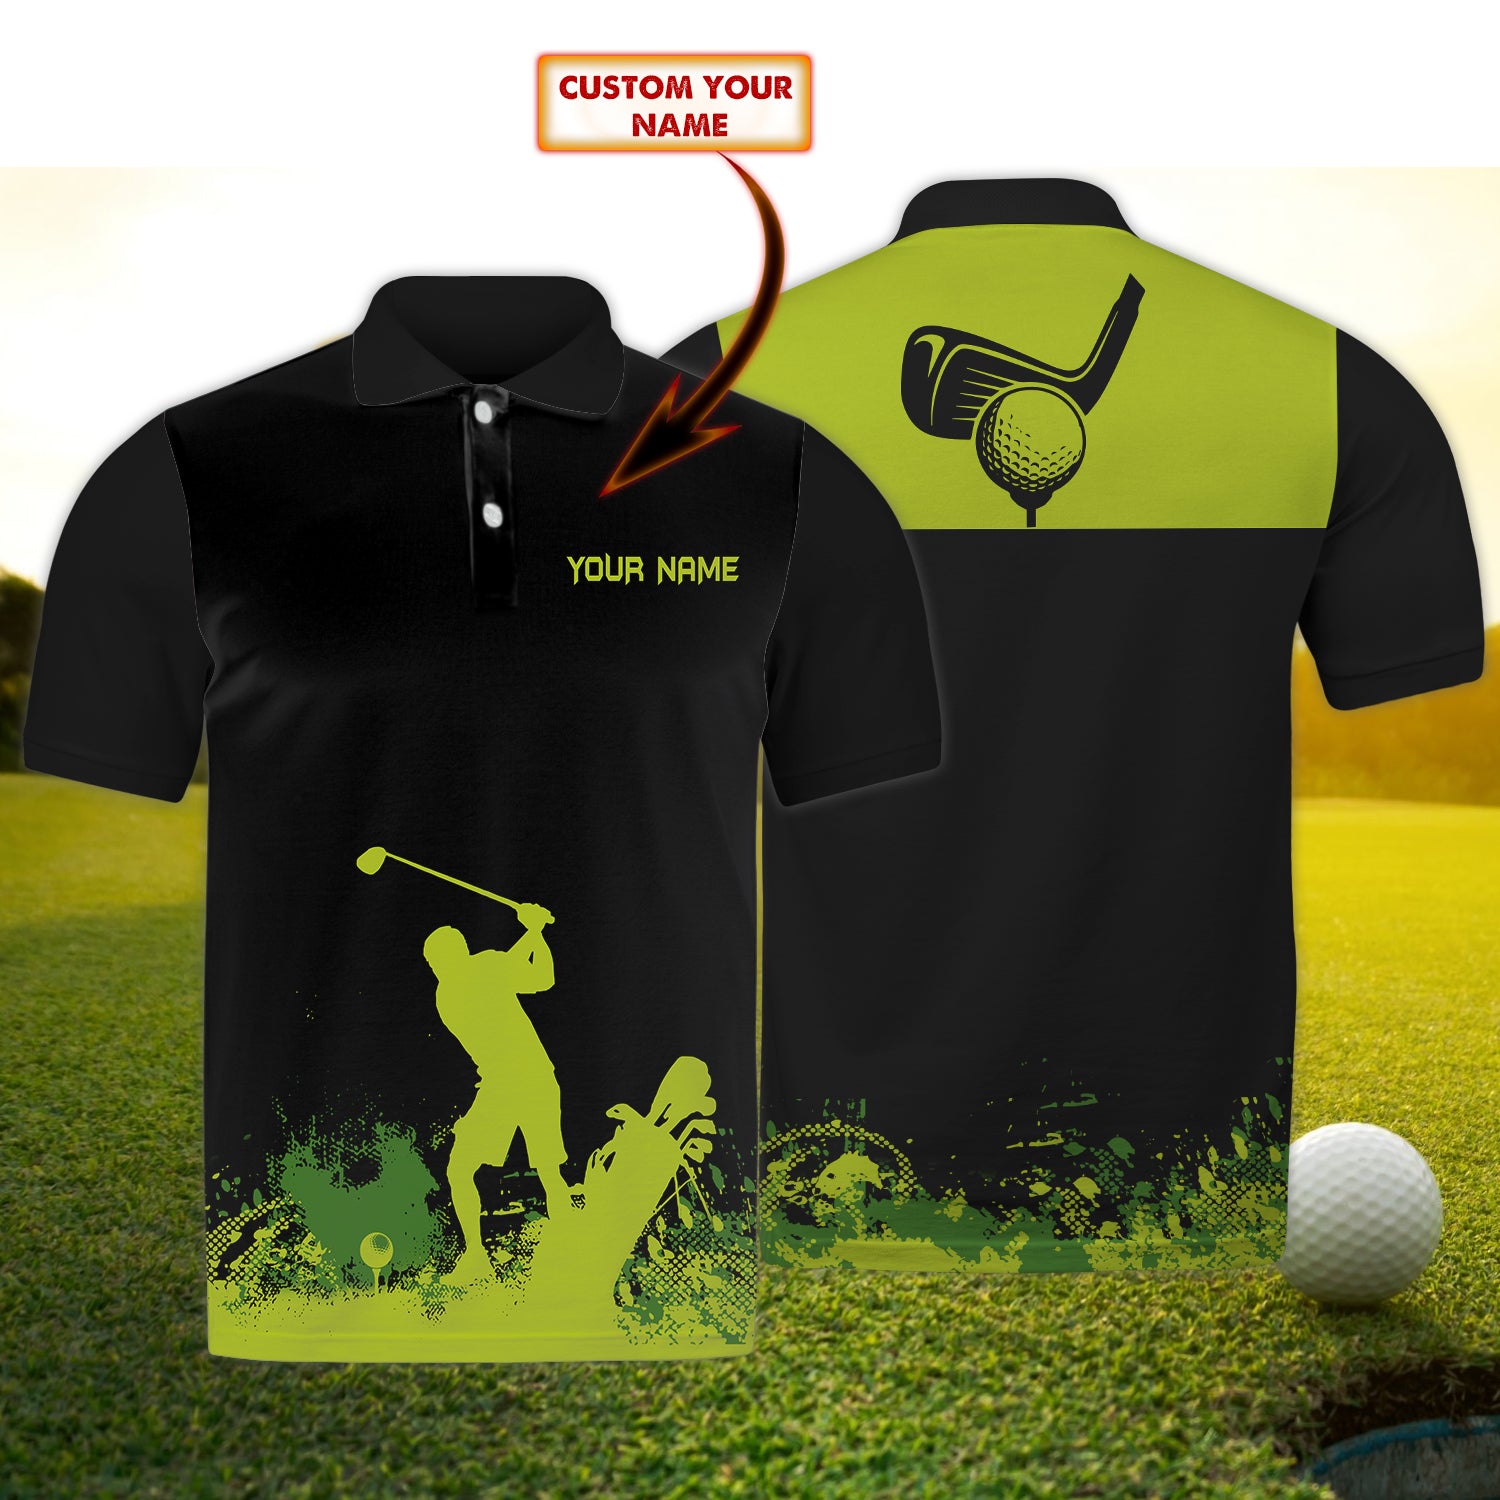 Golf 1 - Personalized Name 3D Polo Shirt - Nt168